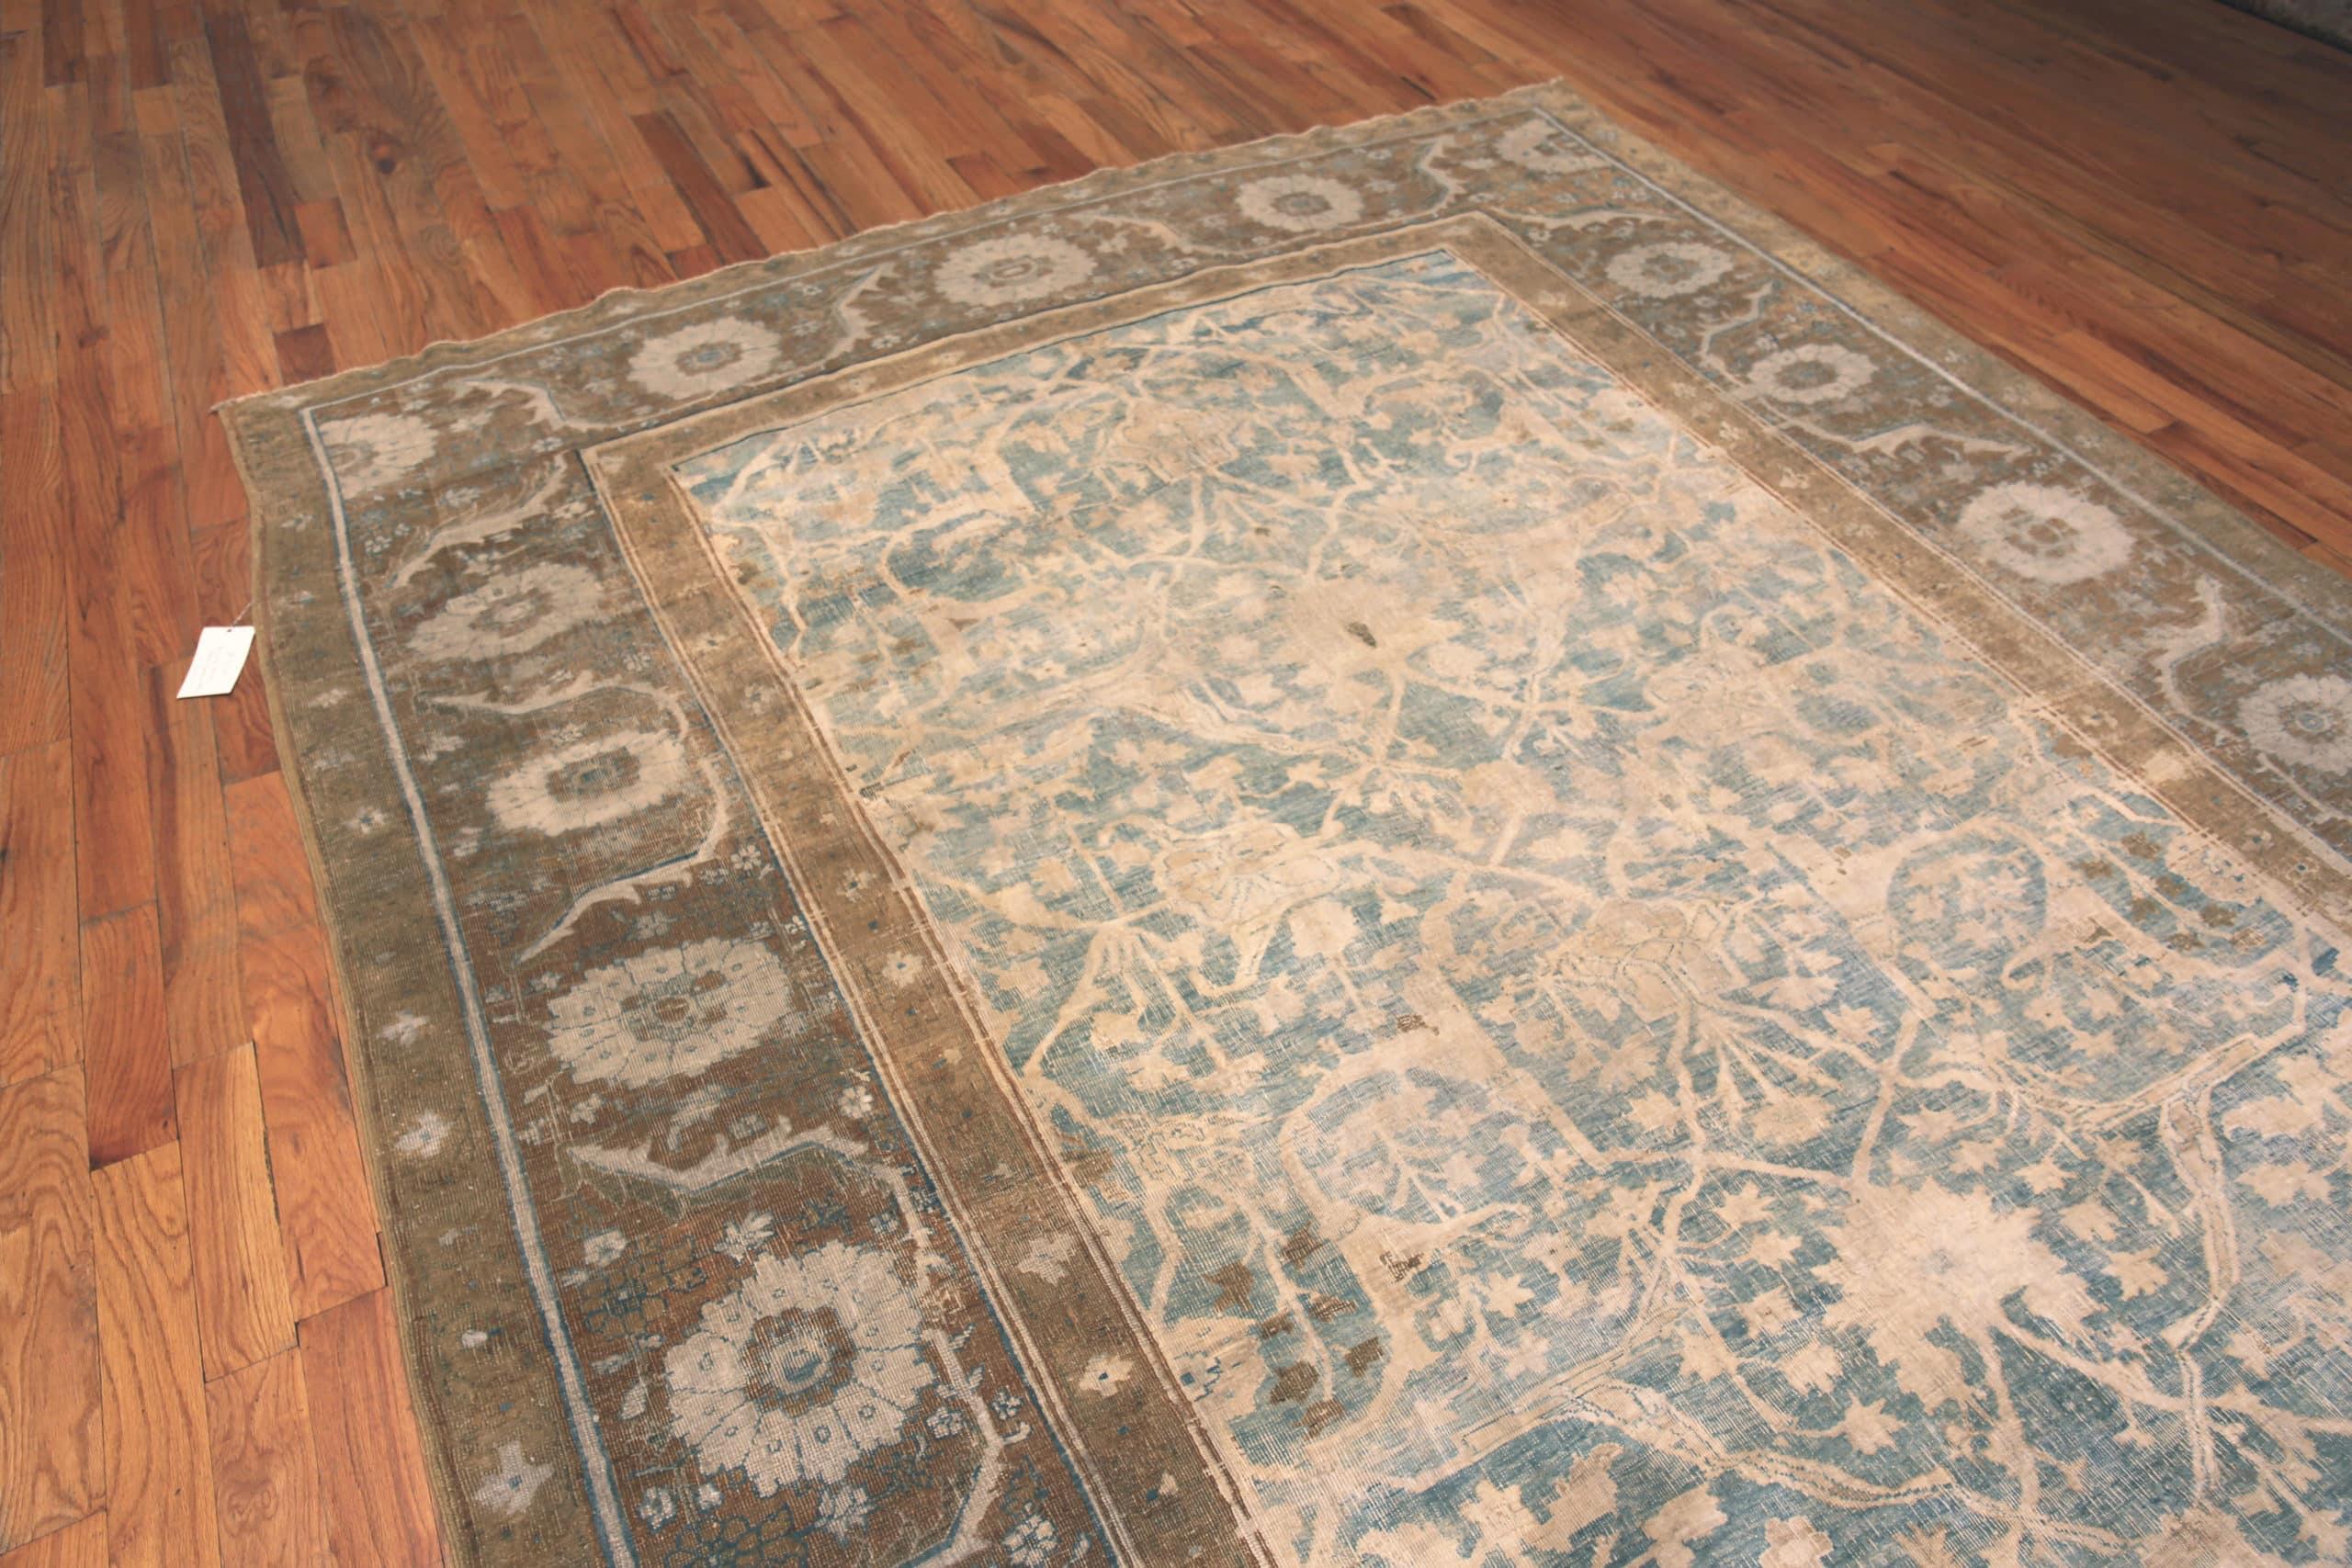 Early 20th Century Nazmiyal Collection Antique Persian Tabriz Rug. 8 Ft 6 in x 11 Ft 1 in